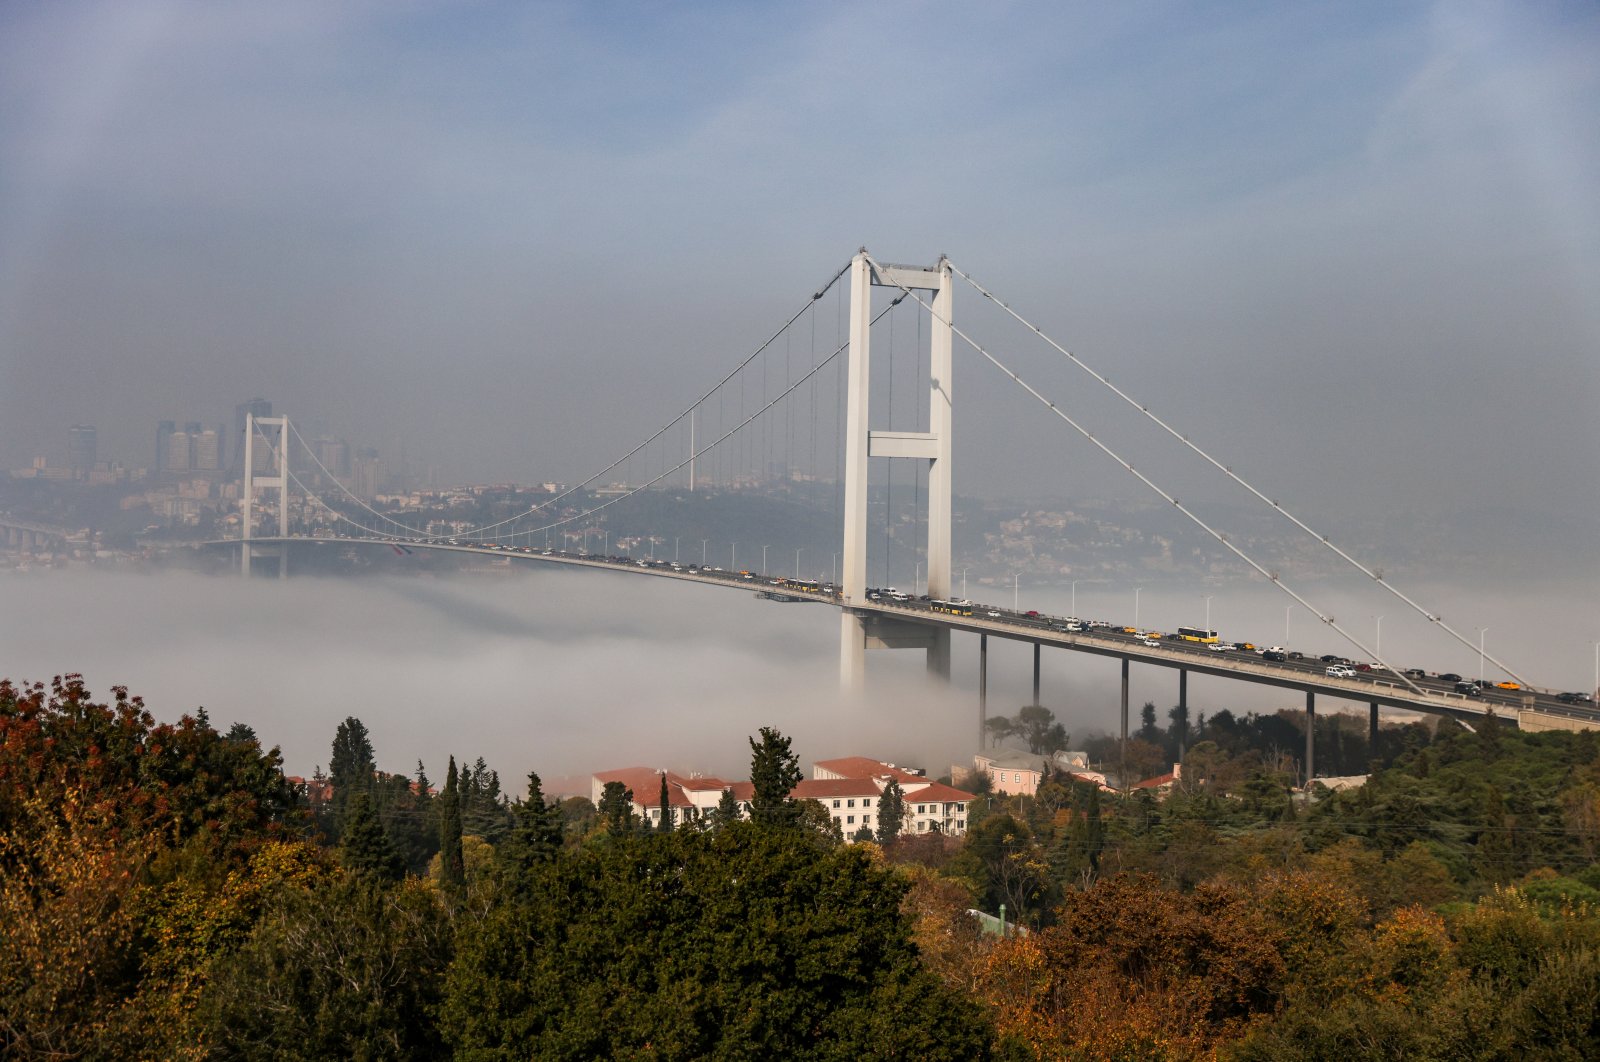 The 15 July Martyrs Bridge, formerly known as the Bosporus Bridge, which links the city's European and Asian sides, is pictured as fog covers the Bosporus in Istanbul, Turkey, Nov. 6, 2021. (Reuters Photo)